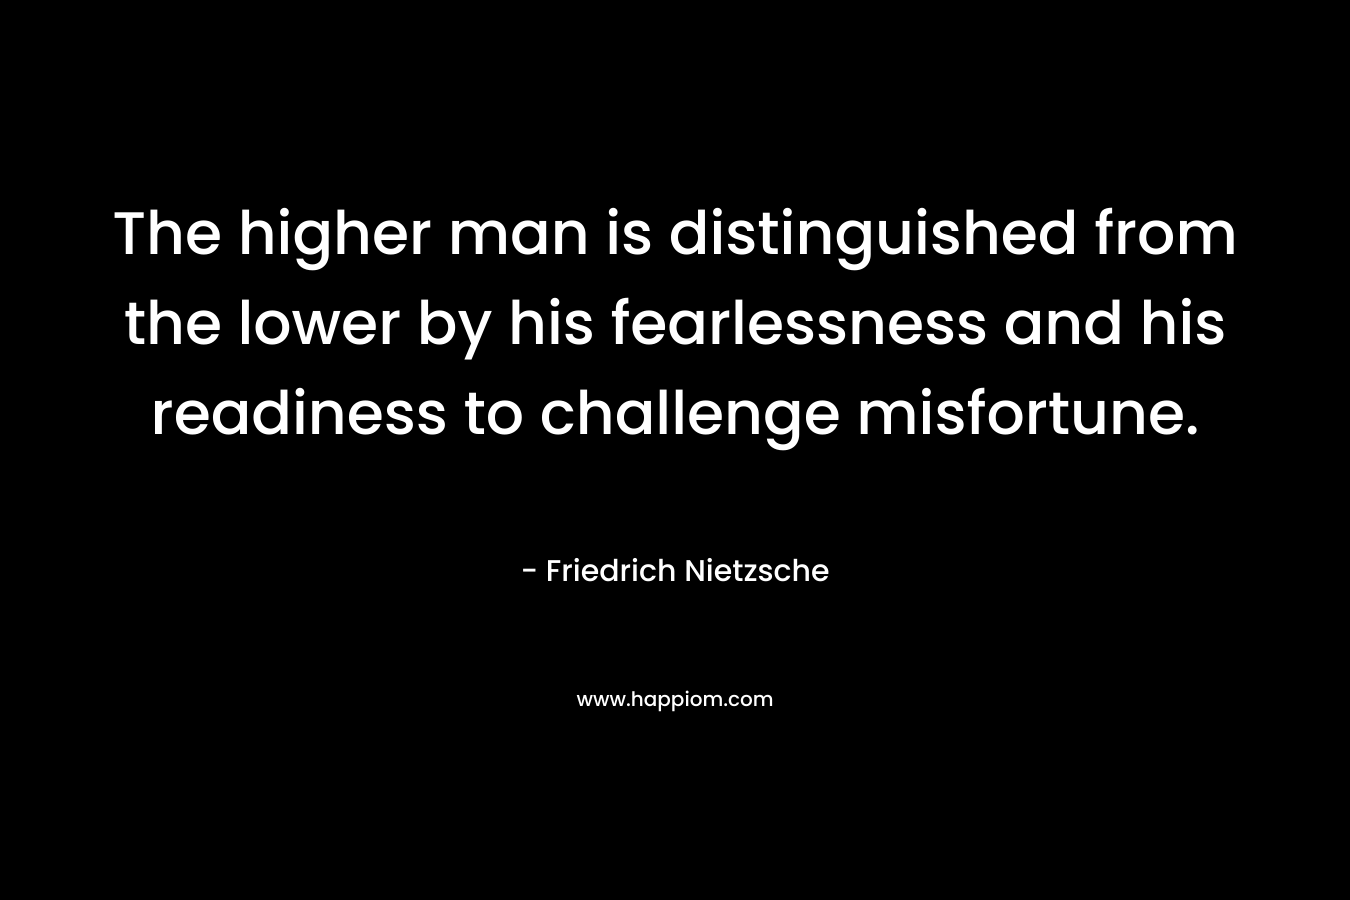 The higher man is distinguished from the lower by his fearlessness and his readiness to challenge misfortune.